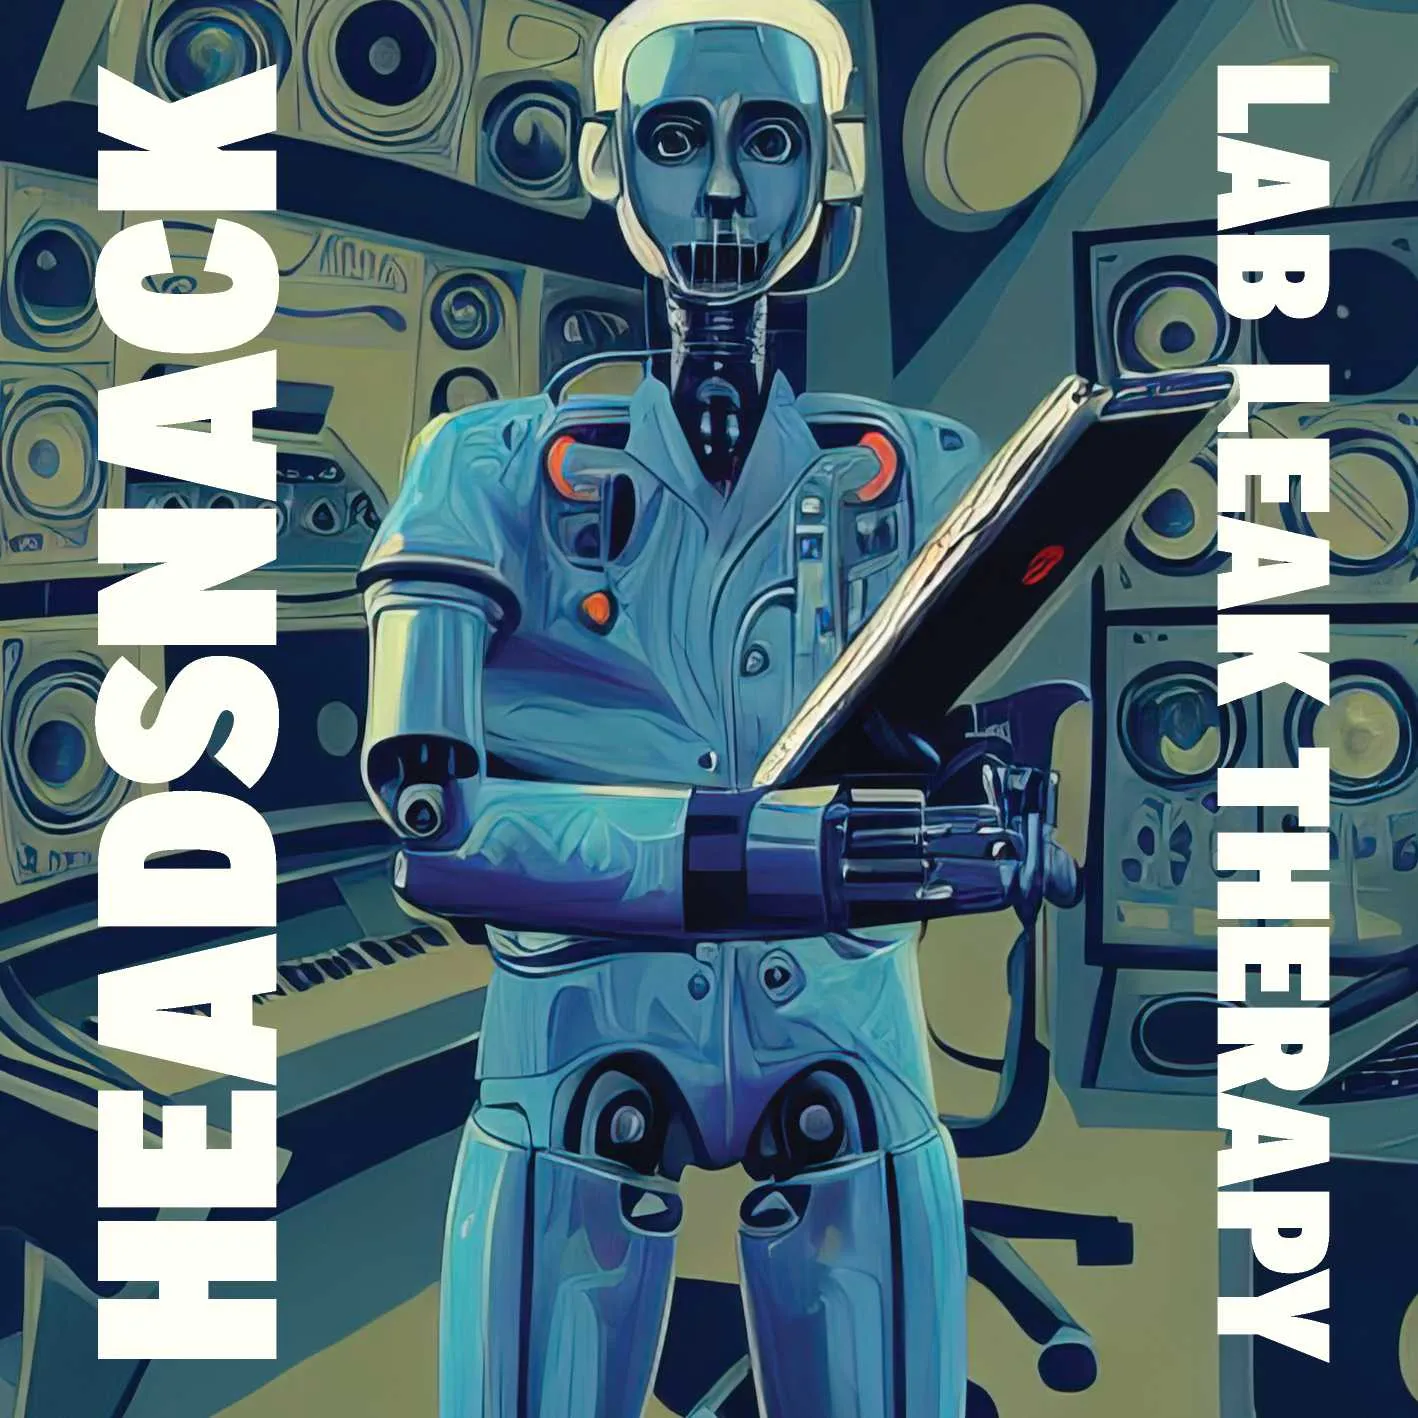 Album cover for “Lab Leak Therapy” by Headsnack